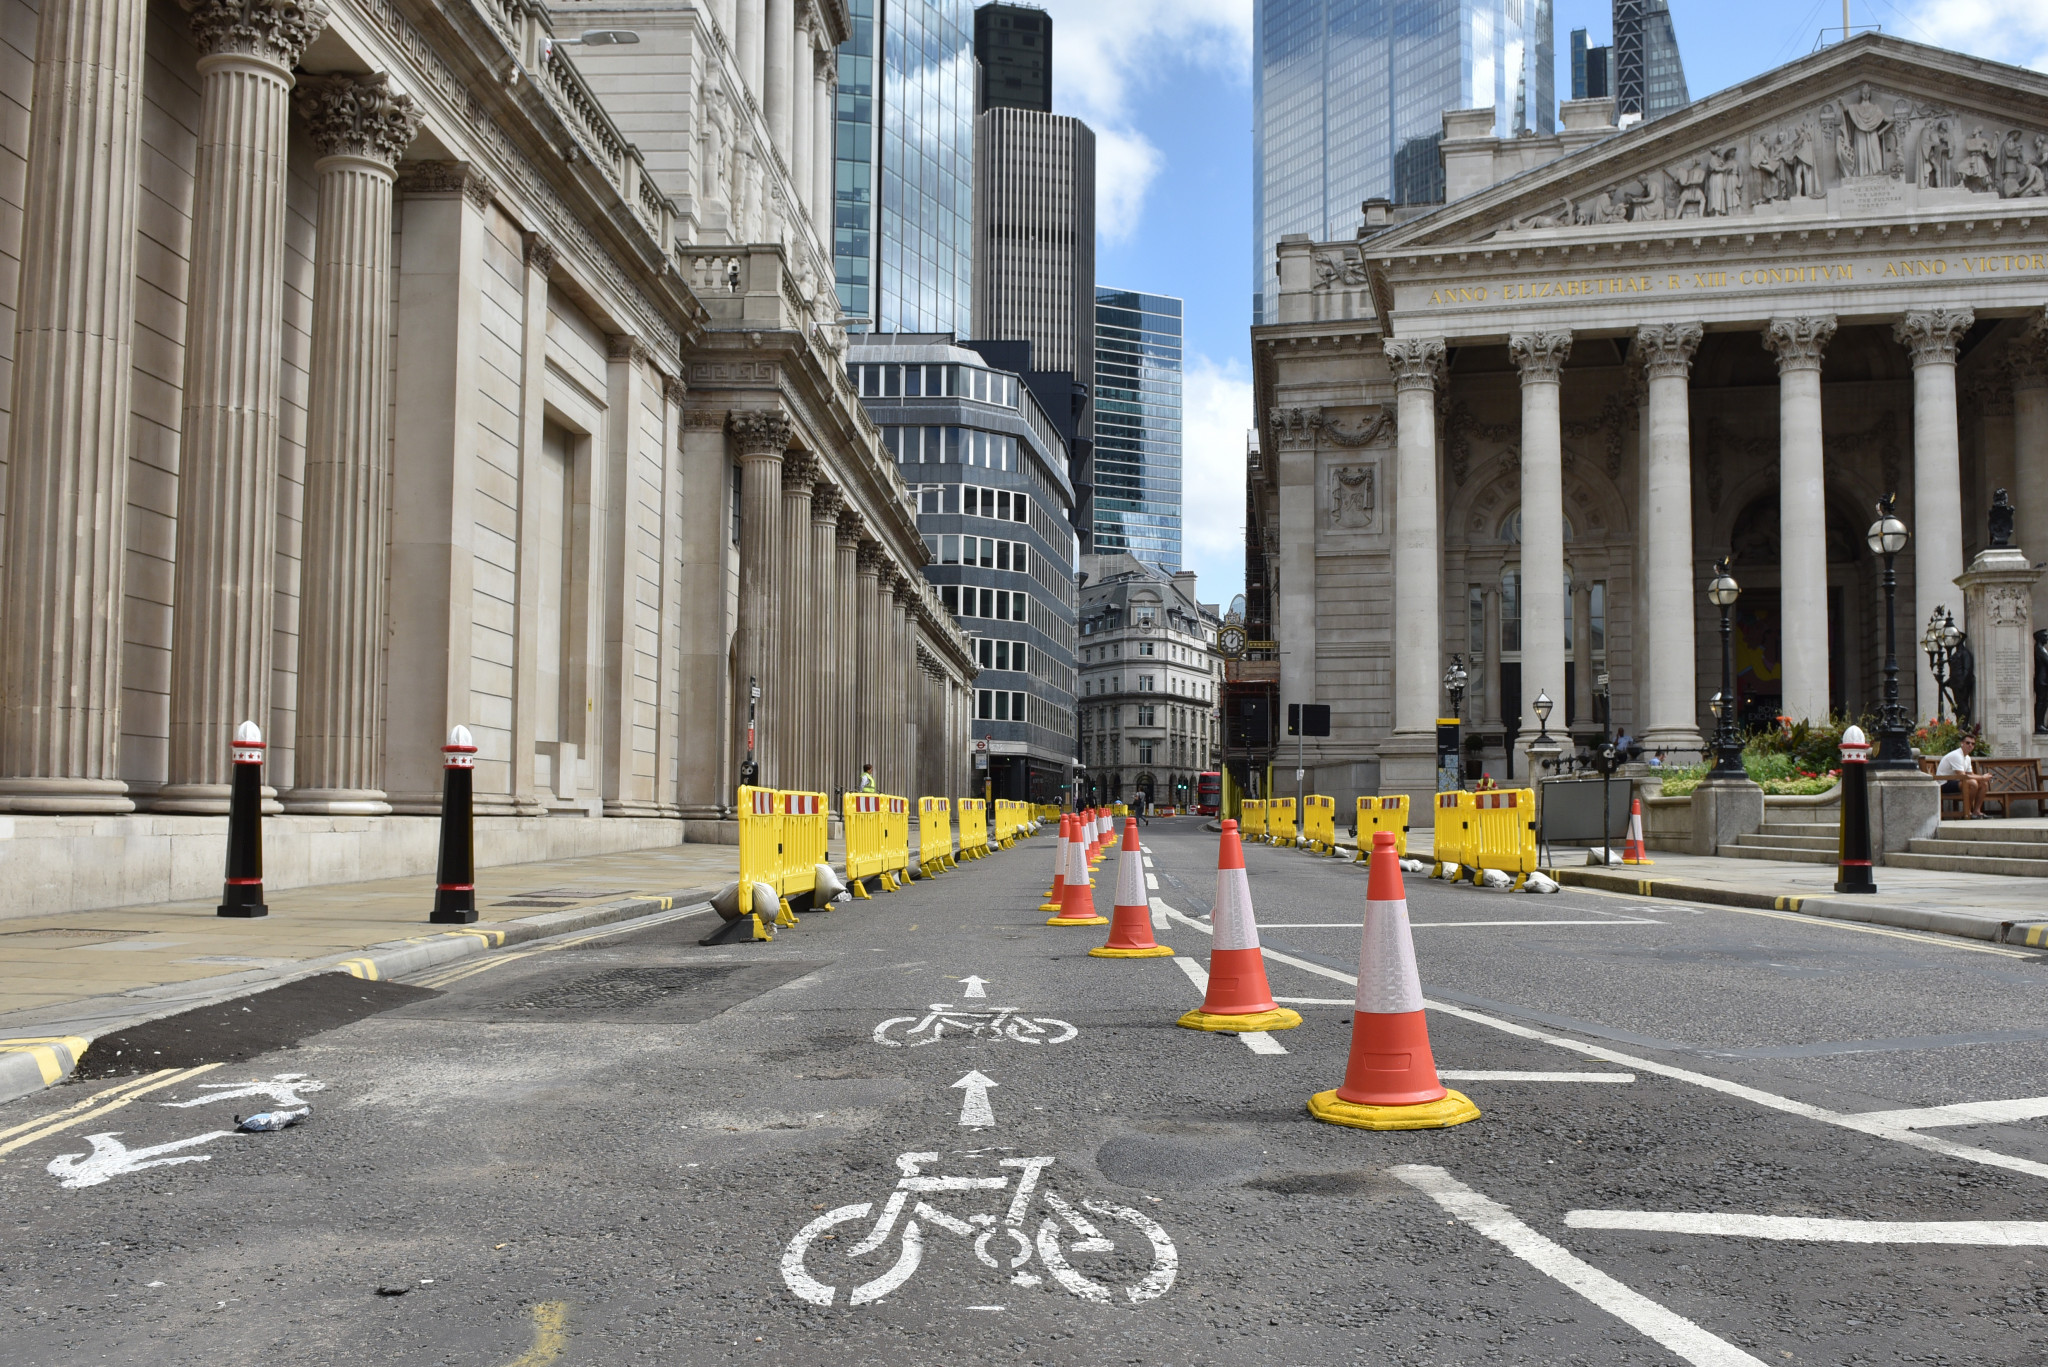 Cycling infrastructure in London improved markedly following the Tour de France Grand Depart in 2007 ©Getty Images